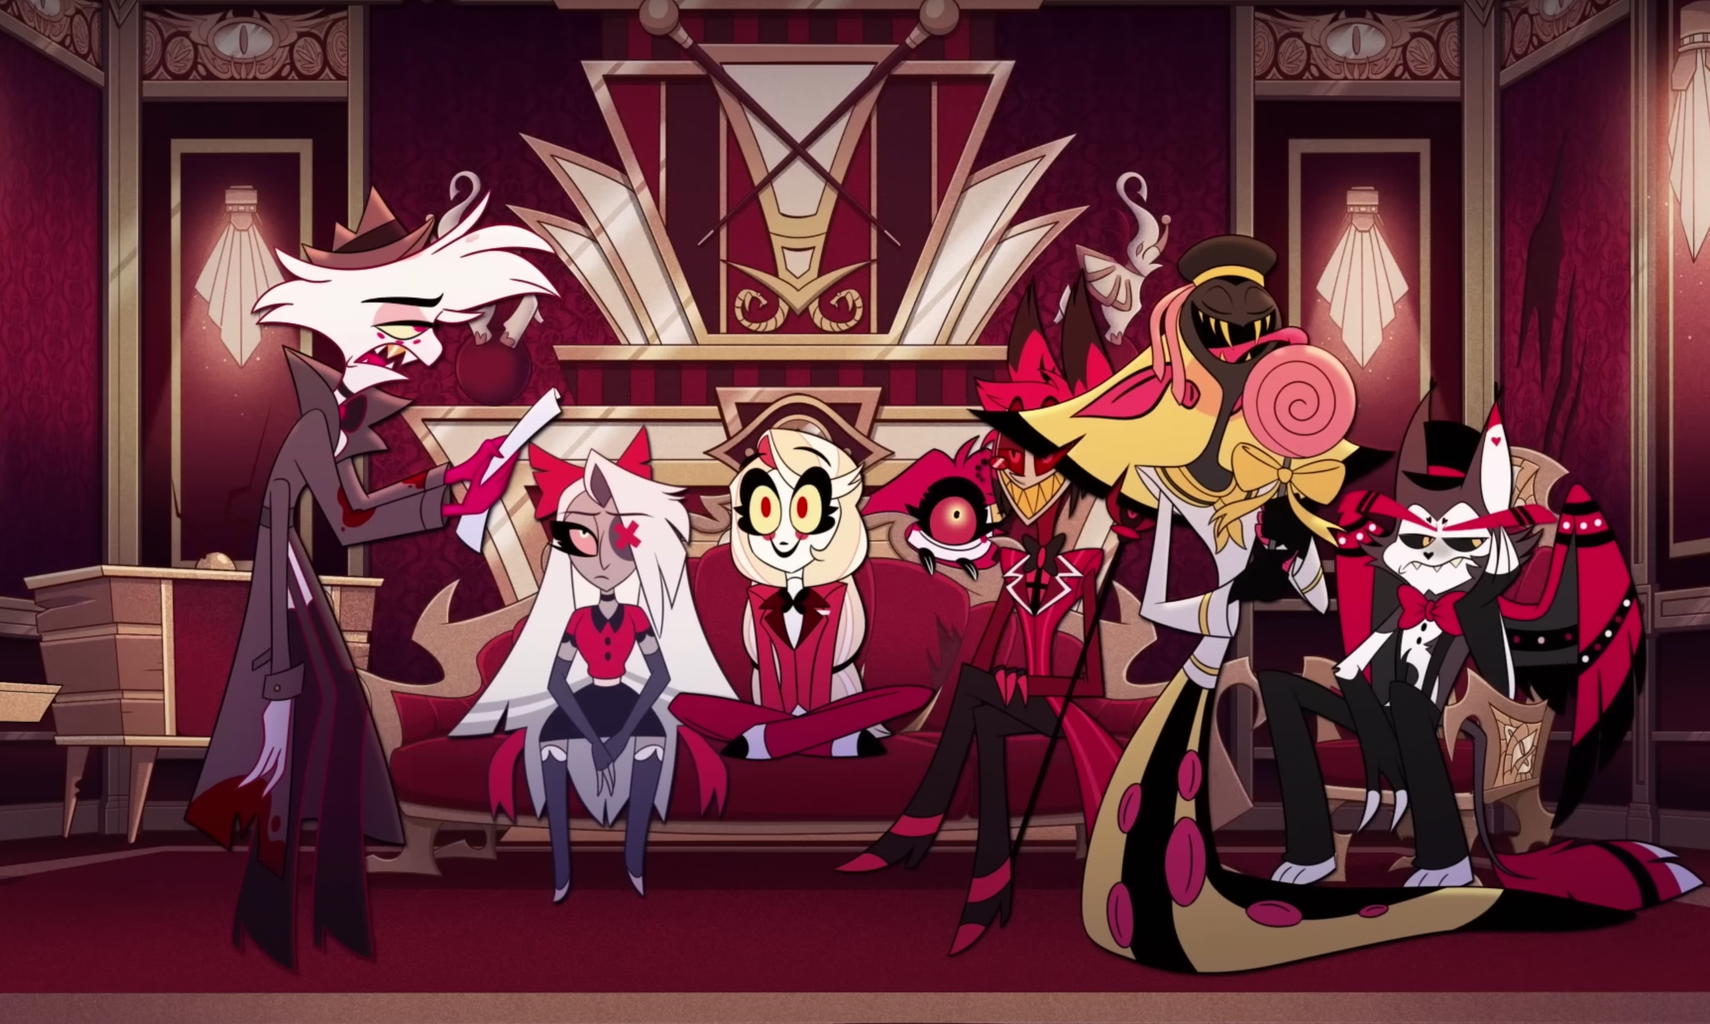 Main characters of Hazbin Hotel, screenshot from the official trailer for Season 1